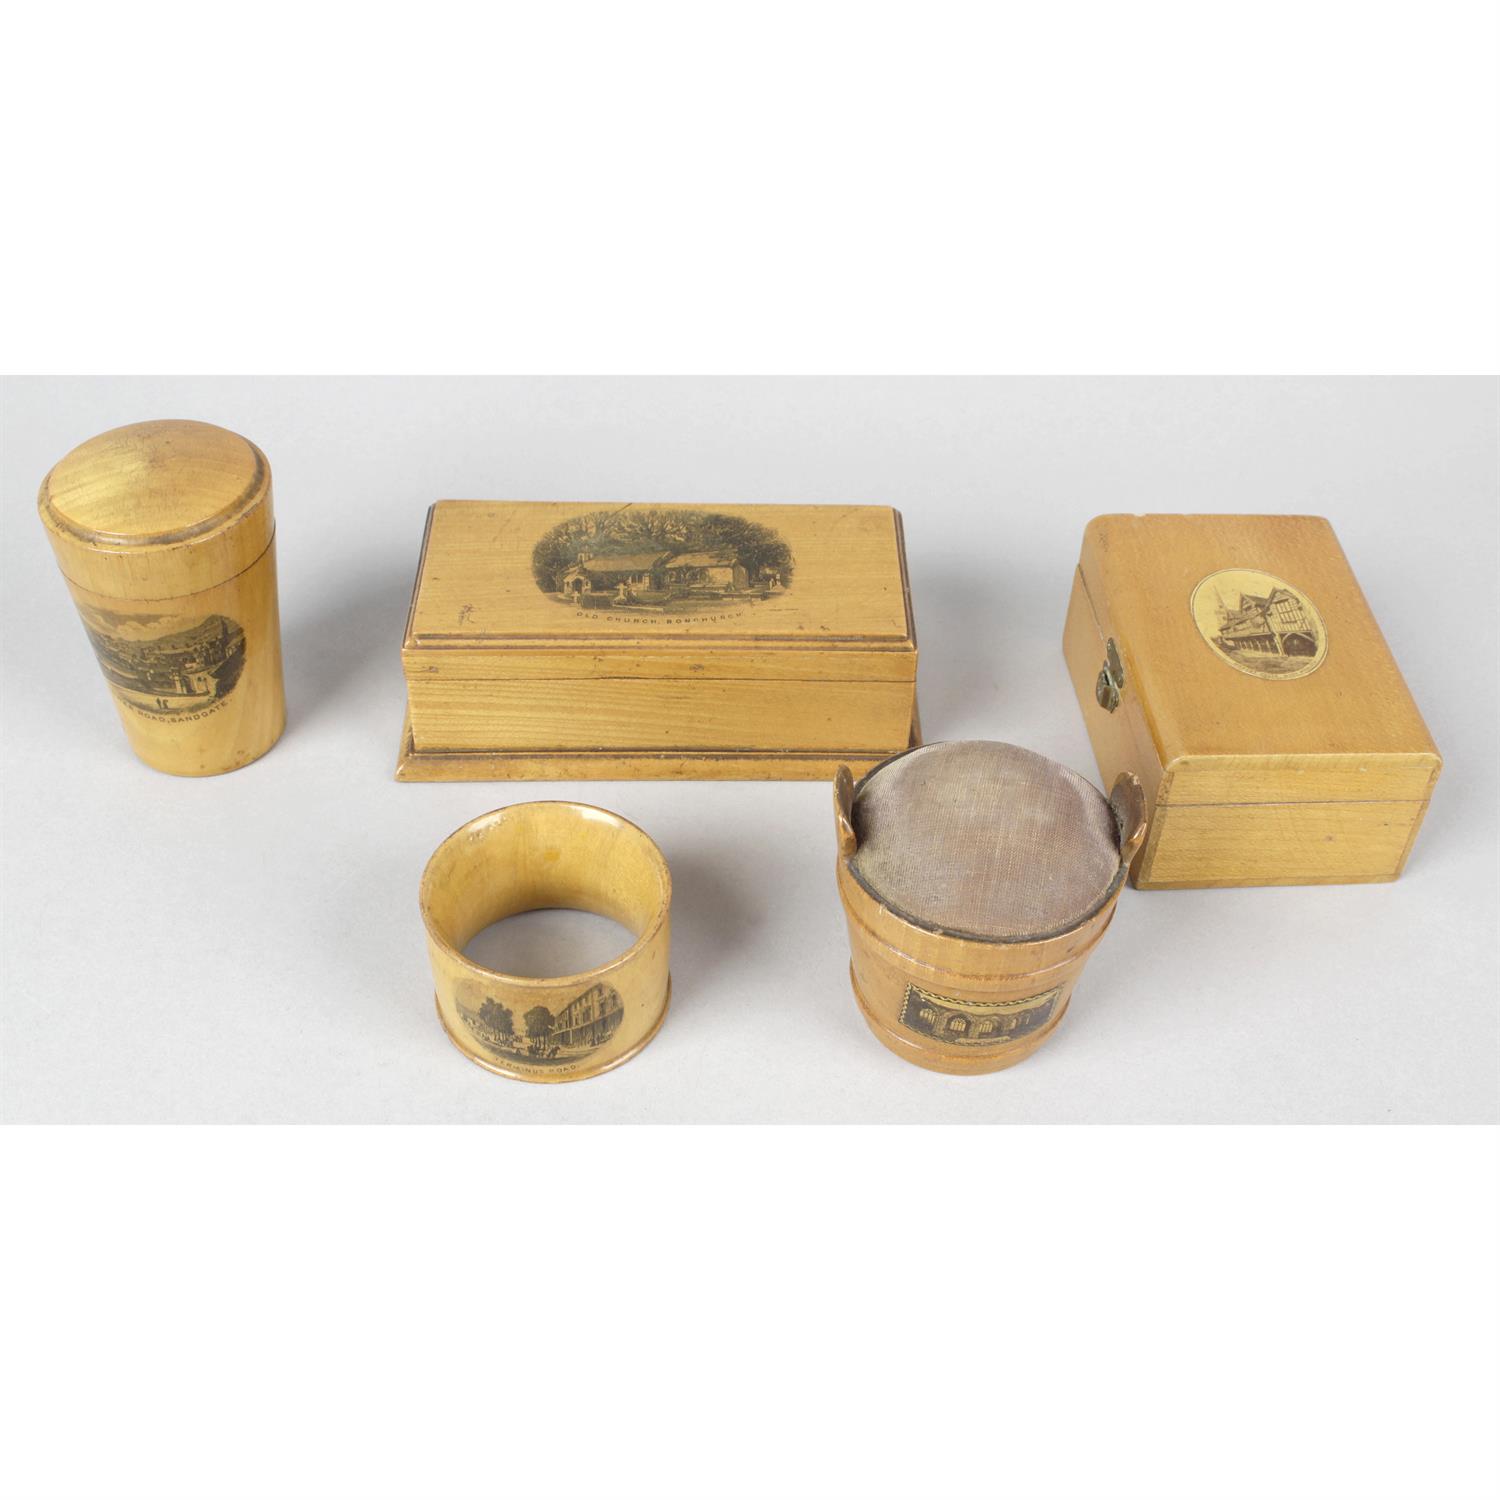 A collection of seven items of Mauchline ware.